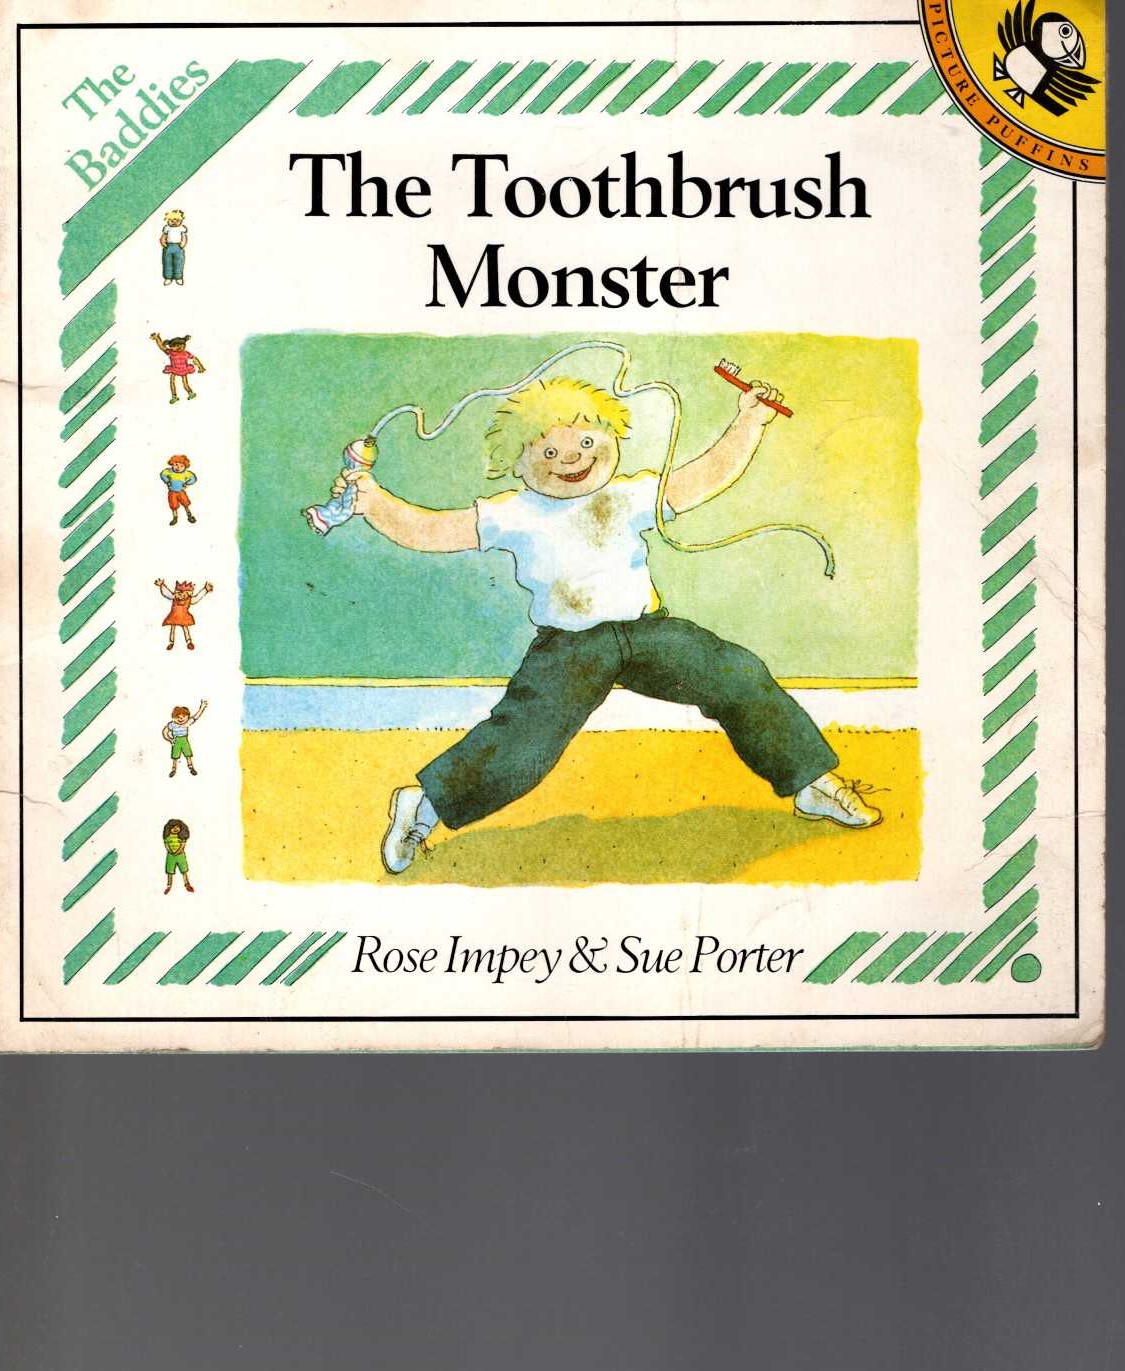 THE TOOTHBRUSH MONSTER front book cover image